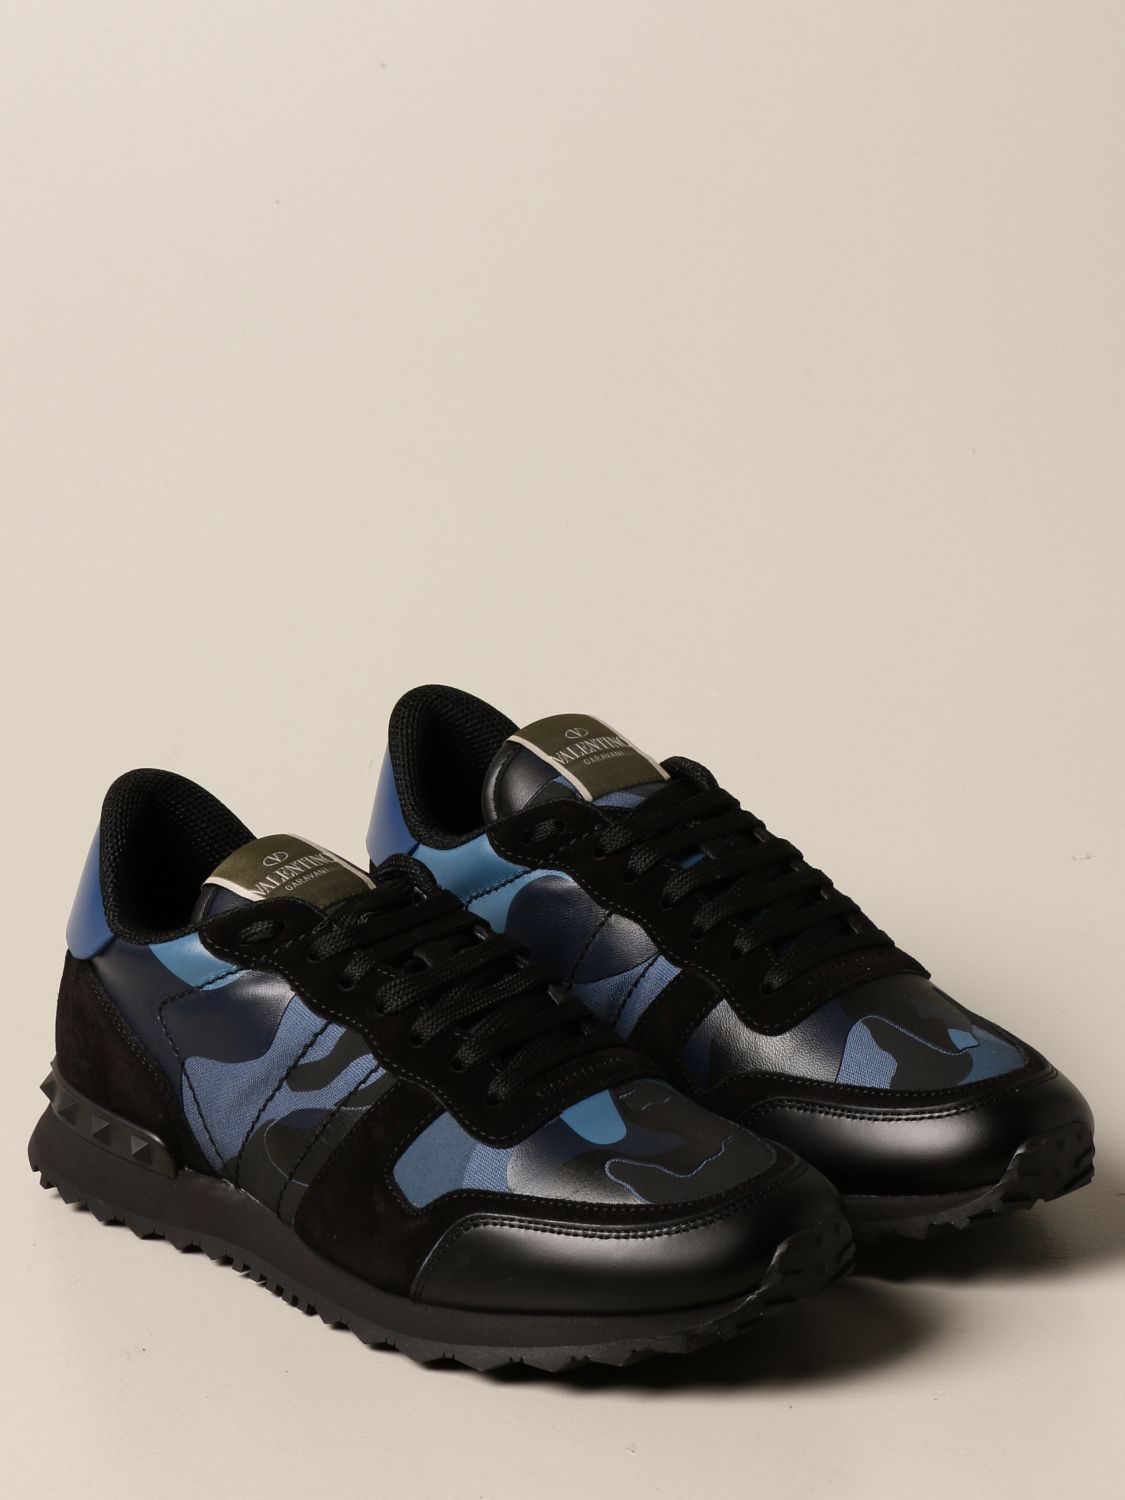 Syndicate smid væk Tentacle VALENTINO GARAVANI: Rock Runner camouflage sneakers | Shoes Valentino  Garavani Men Blue | Shoes Valentino Garavani UY0S0723 TCC GIGLIO.COM